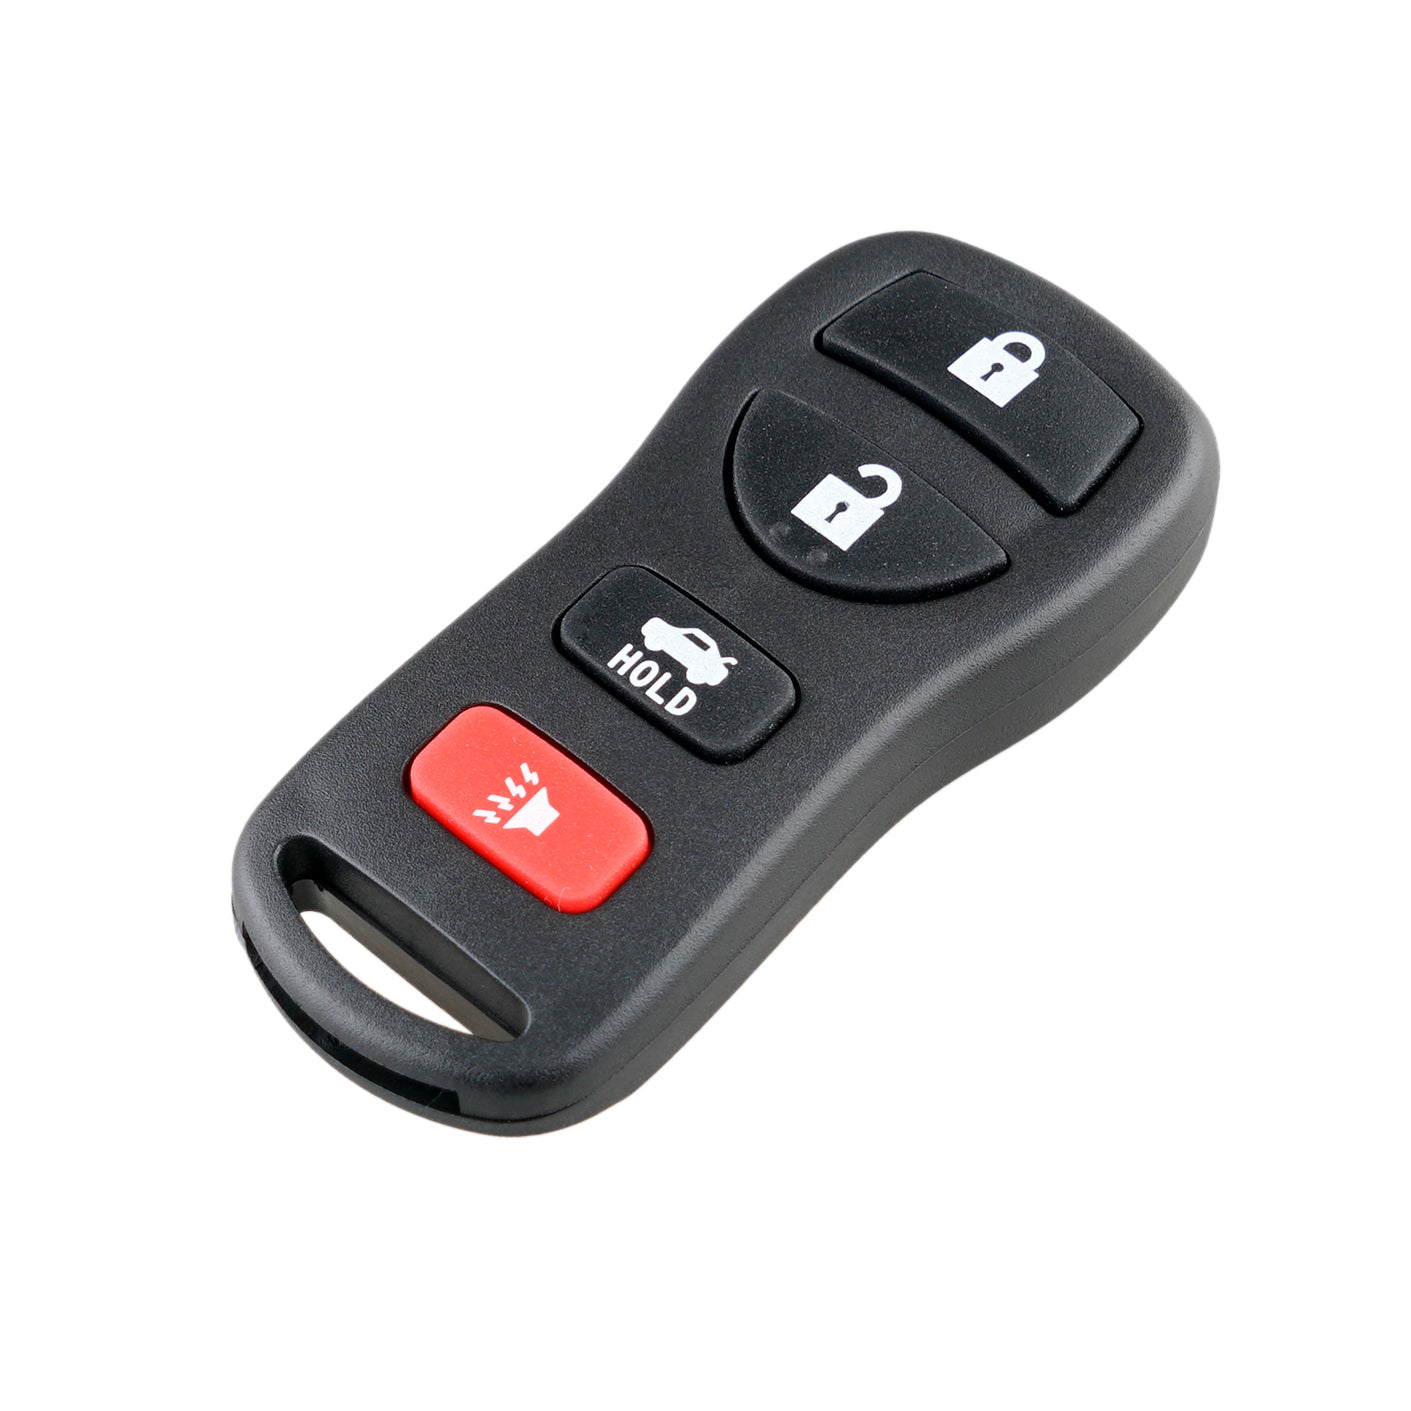 New Replacement Shell Case and 4 Button Pad for Remote Key Fob with FCC KBRASTU15 - Shell ONLY